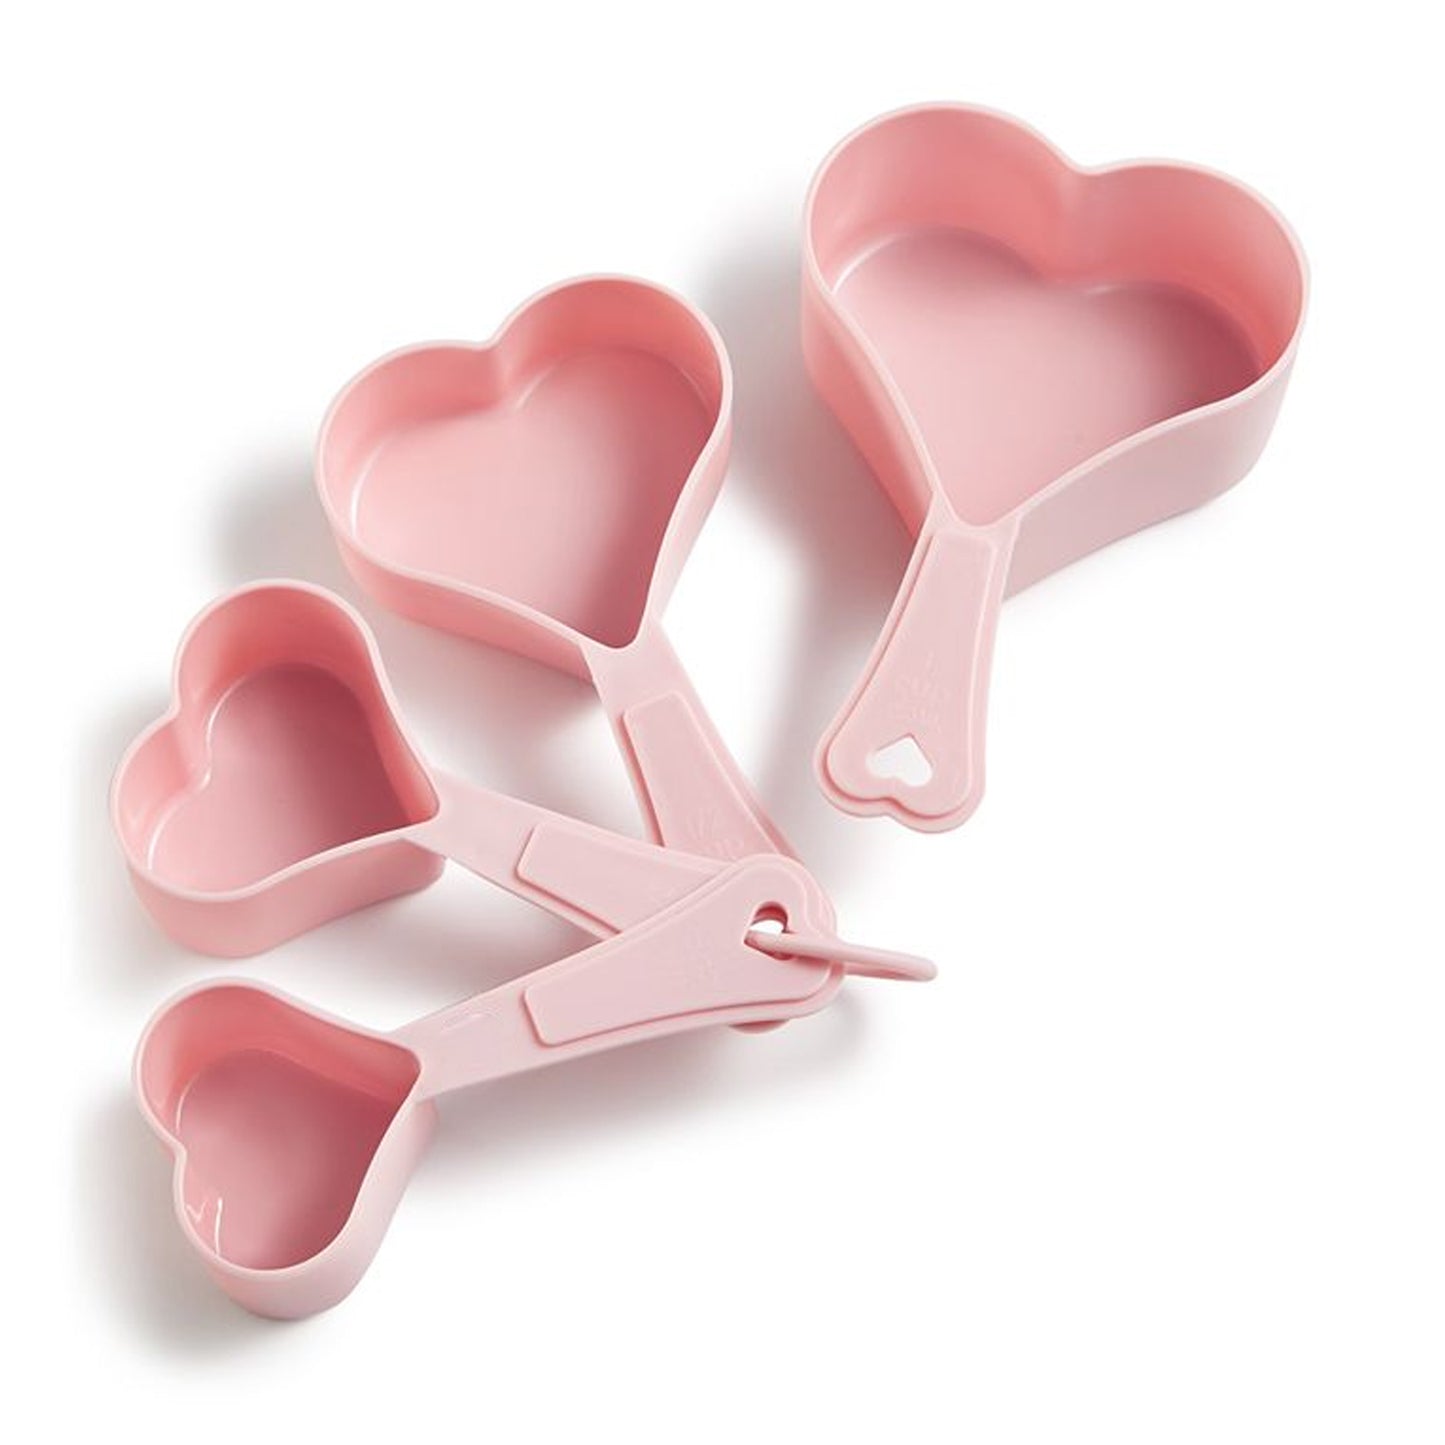 4 IN 1 HEART SHAPED PLASTIC MEASURING CUP SET